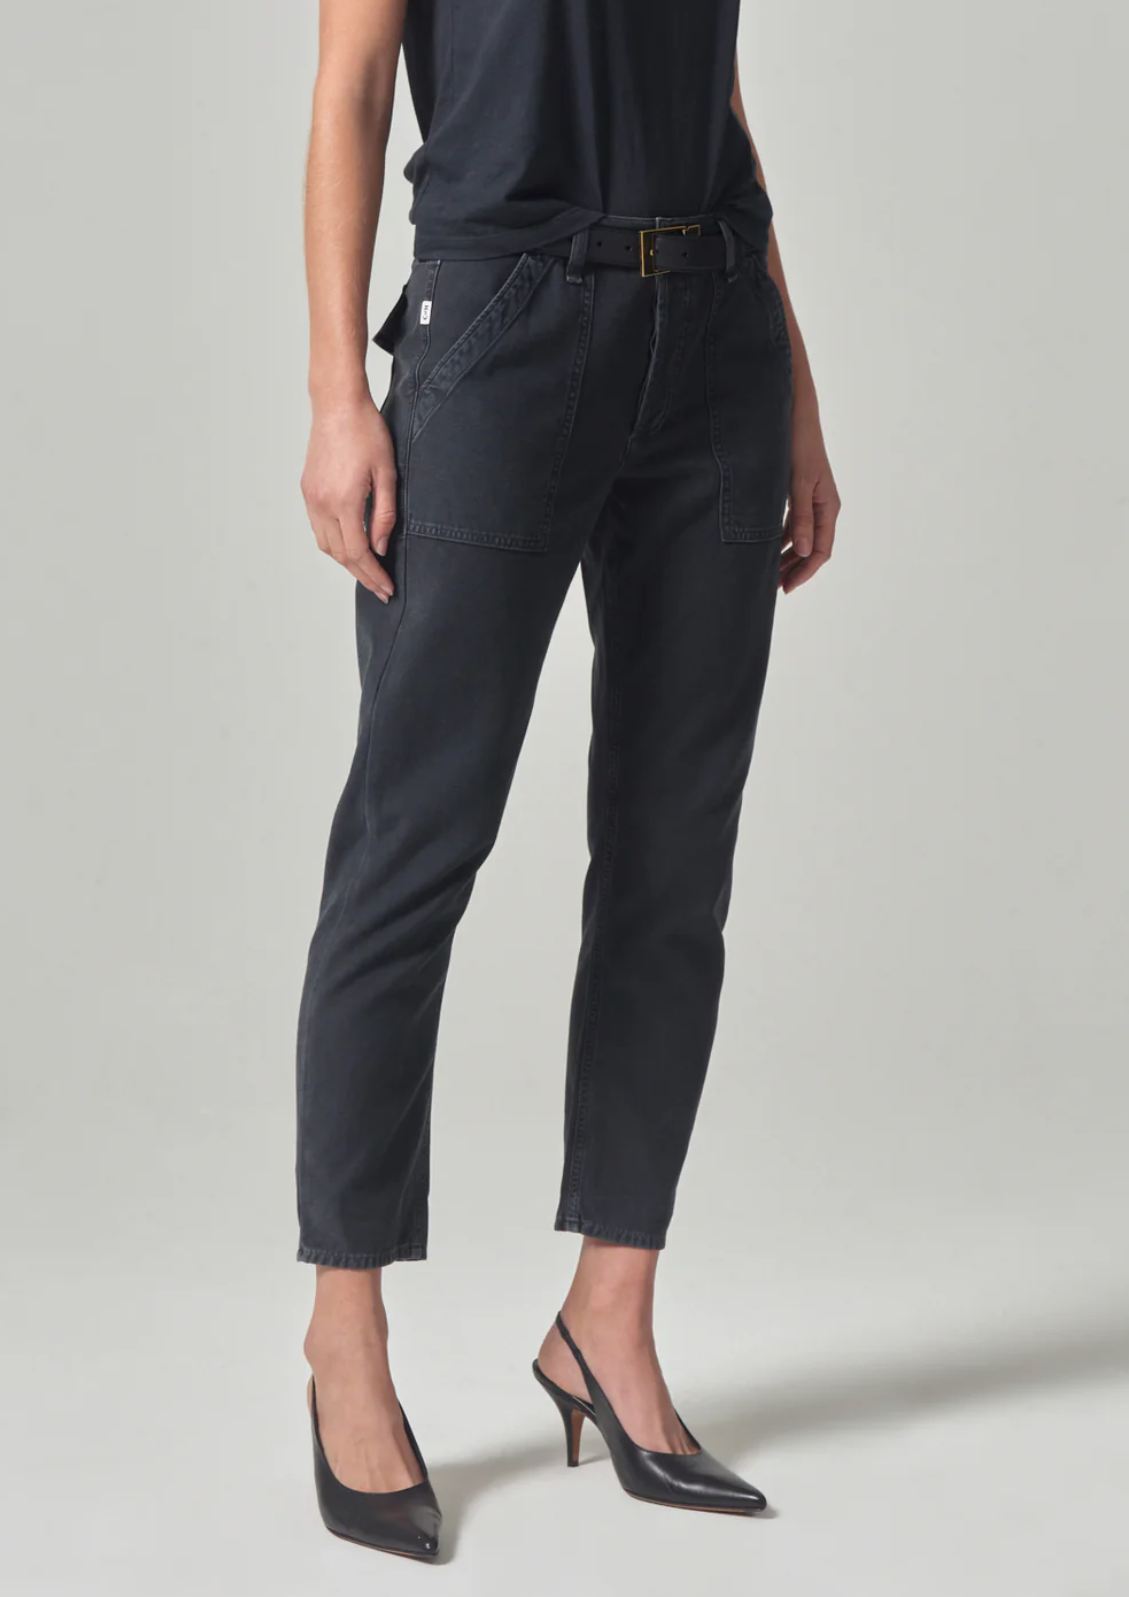 LEAH CARGO PANT IN WASHED BLACK